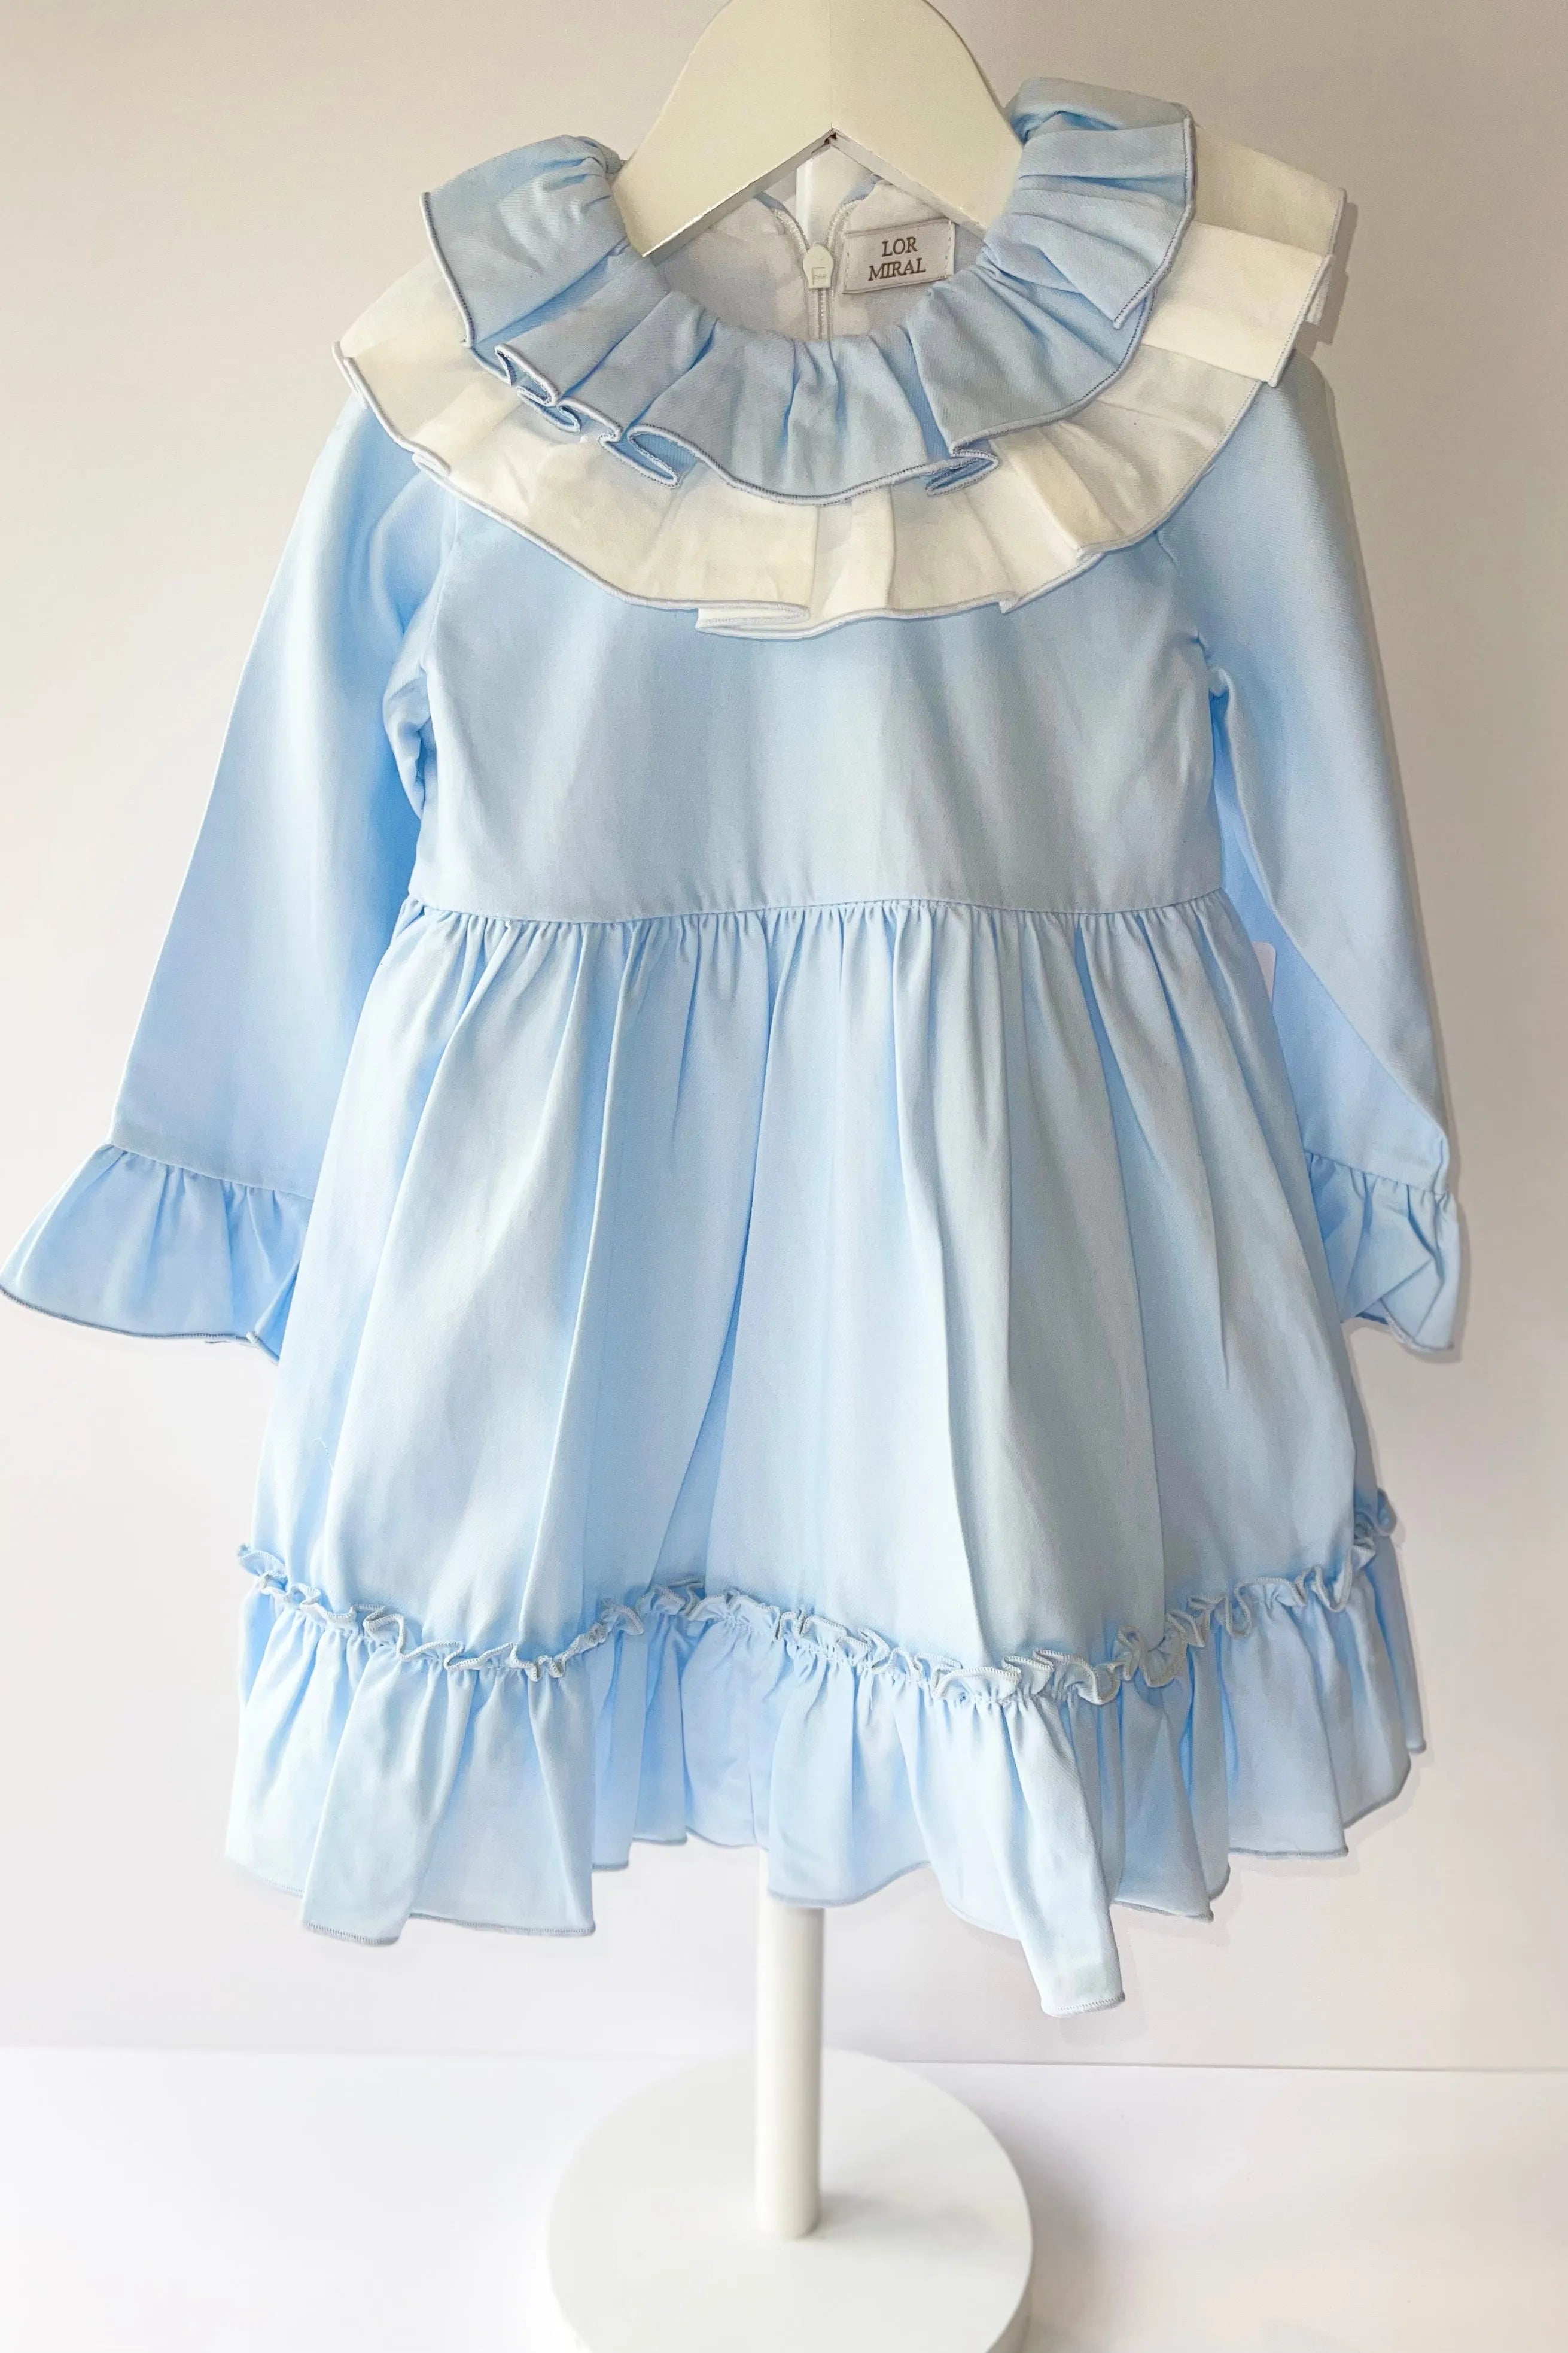 AW22 Lor Miral Girls Blue Puffball Dress 404 - dainty delilah spanish childrens clothing